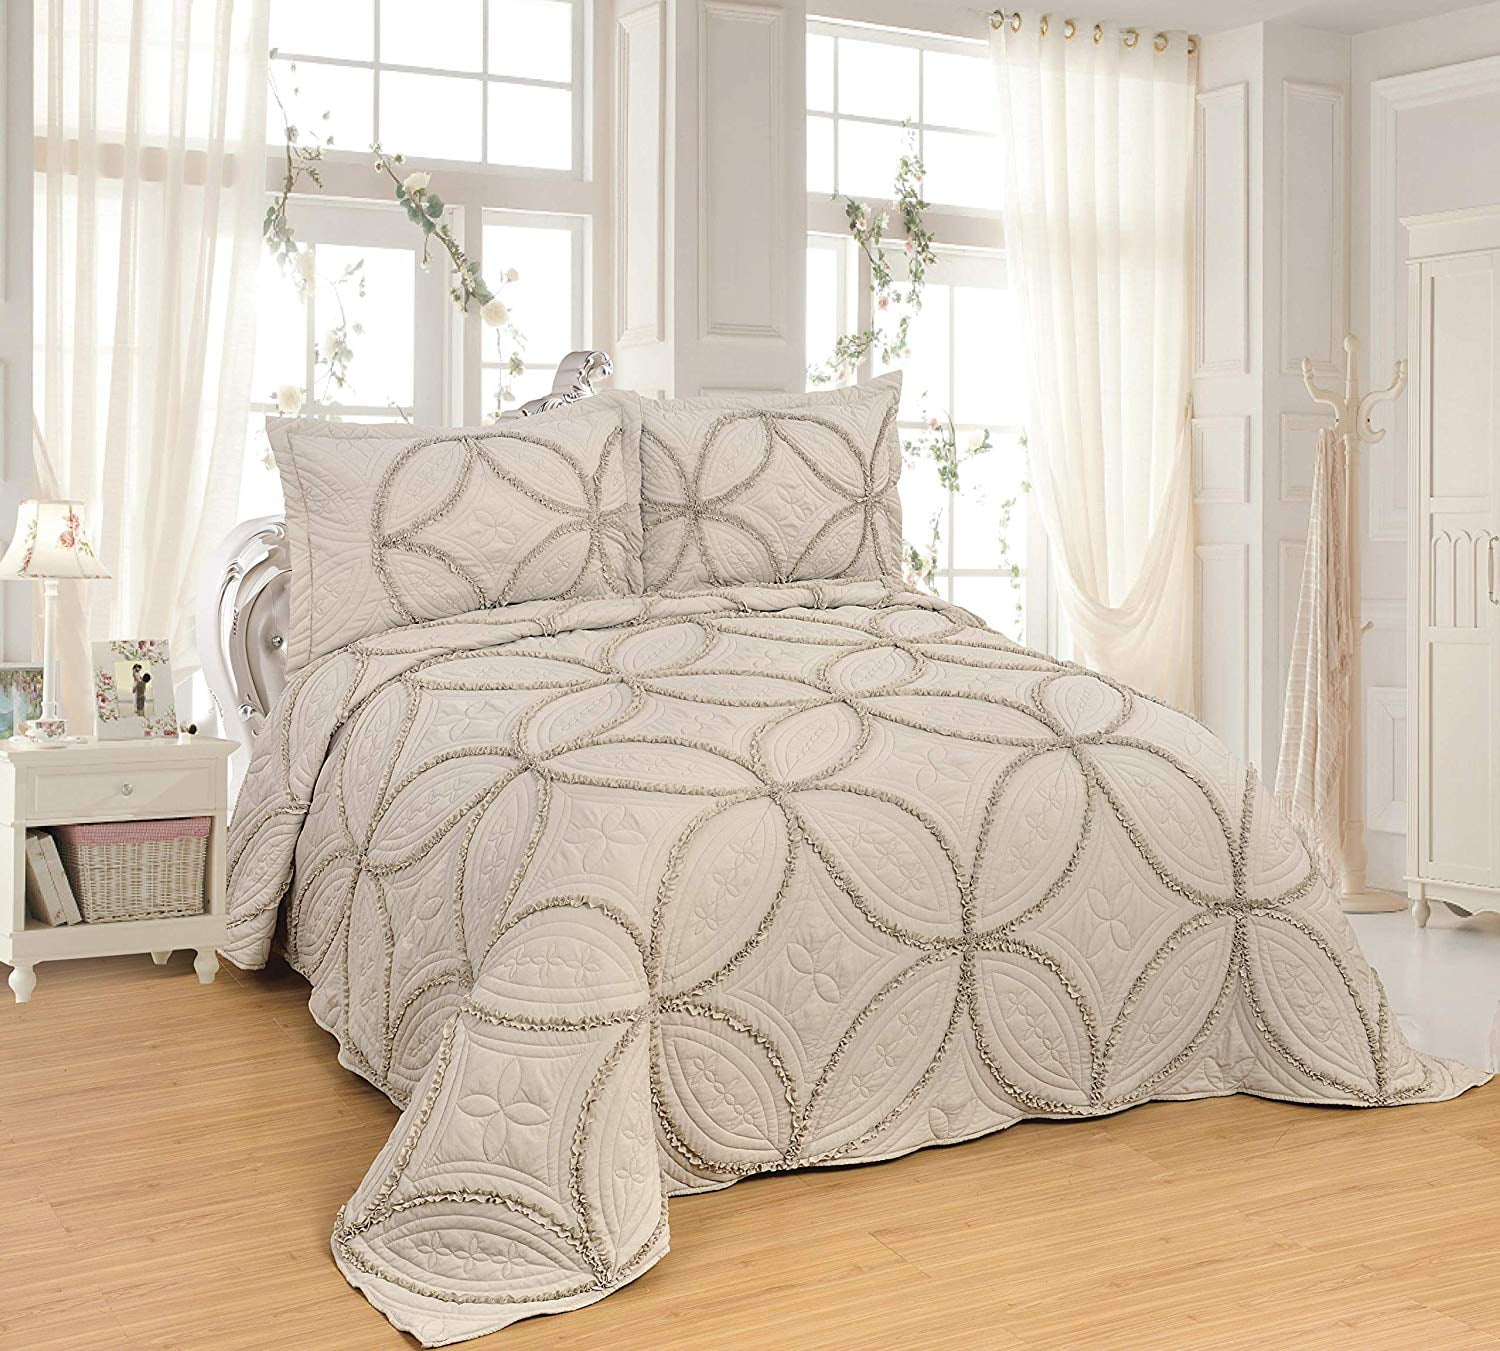 Details about   Luxury 3pc Ivory Geometric Design Quilted Coverlet AND Decorative Shams 